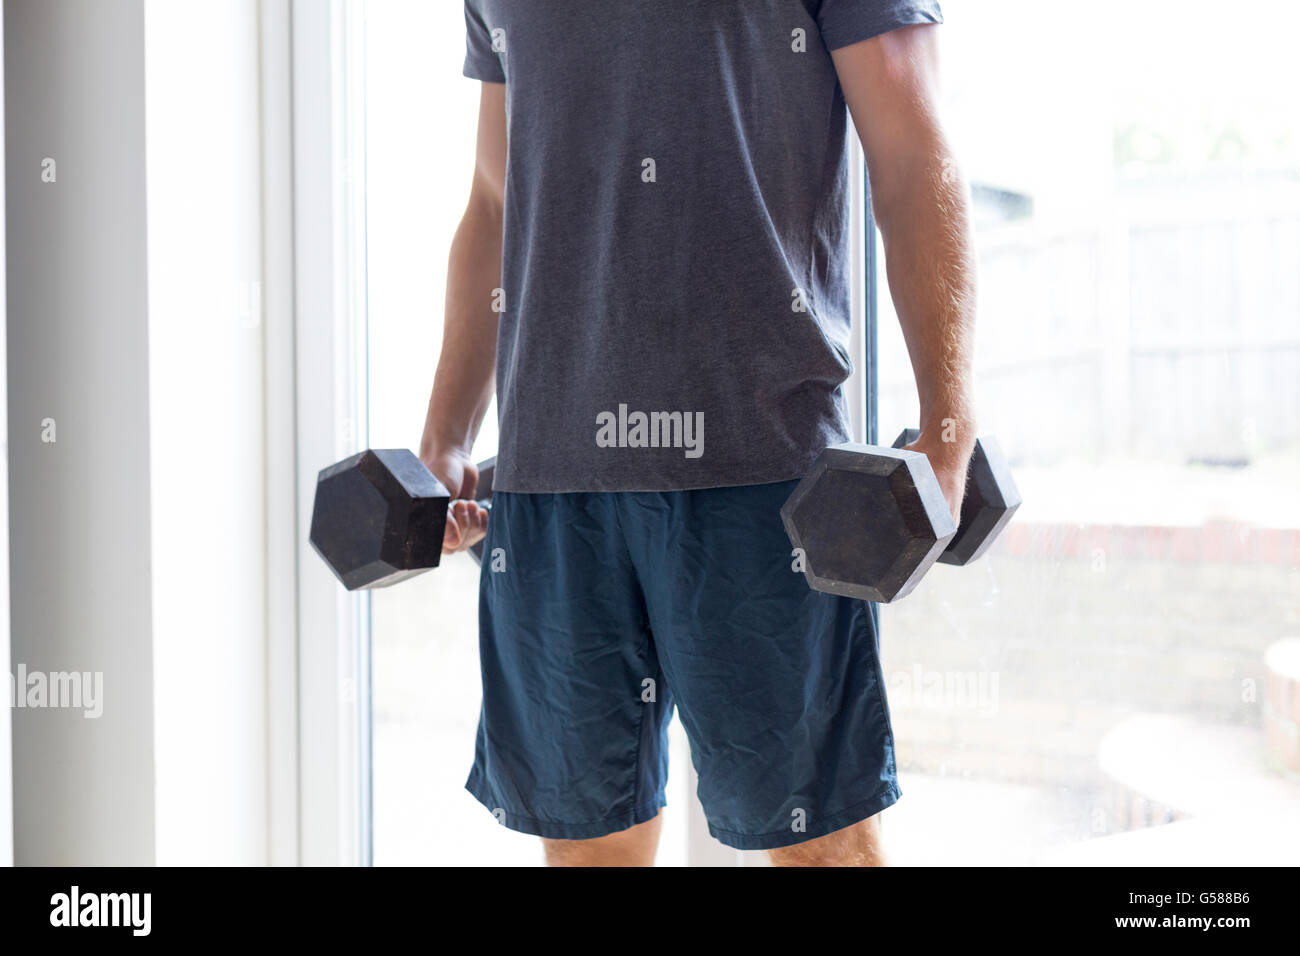 Body shot of a man lifting weights at home Stock Photo